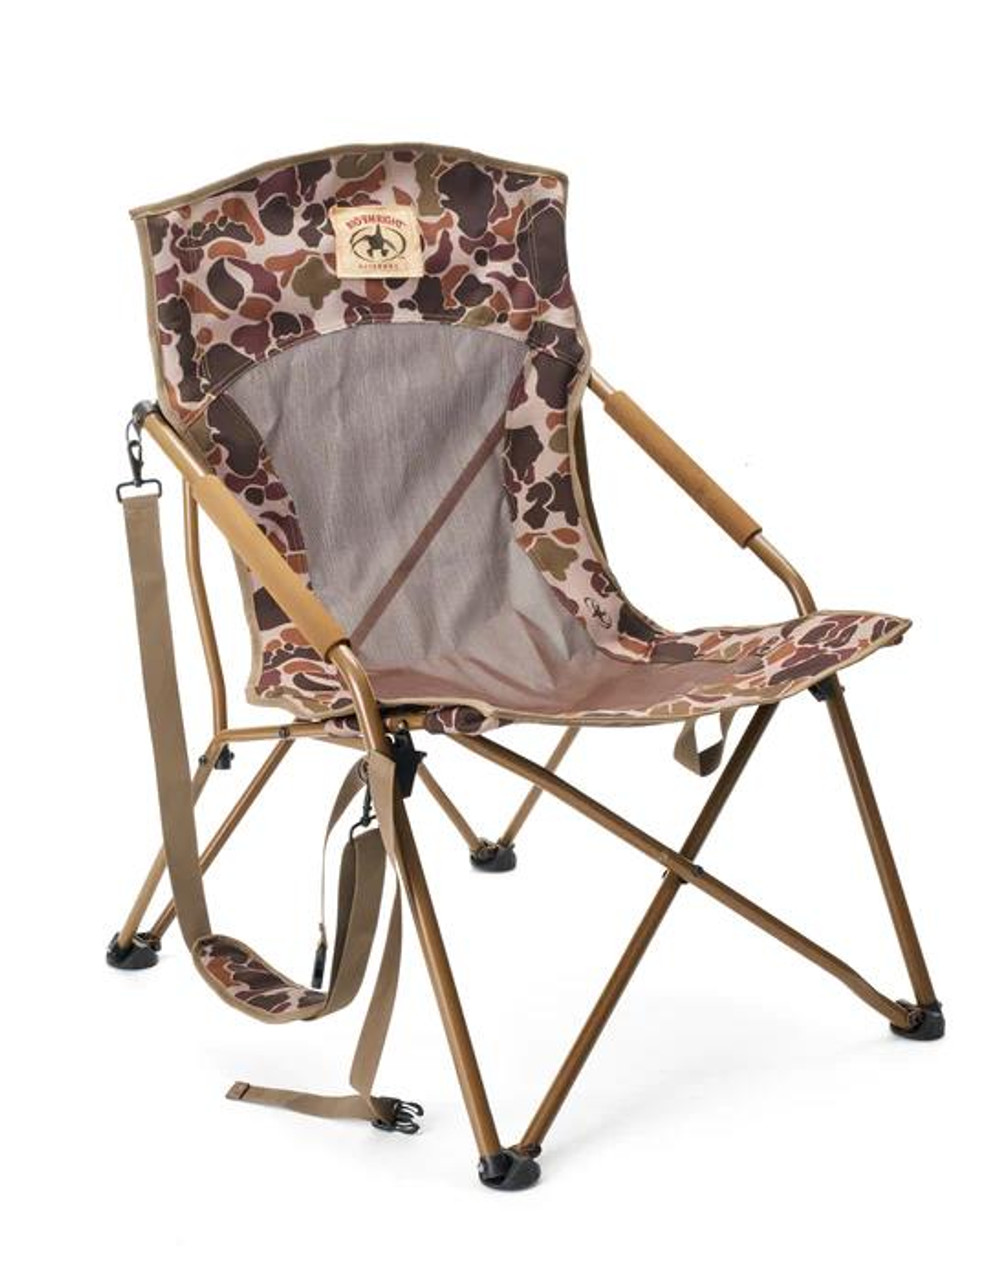 HME FLDSC Folding Seat Hunting Weather Resistant Camo Hunter Chair